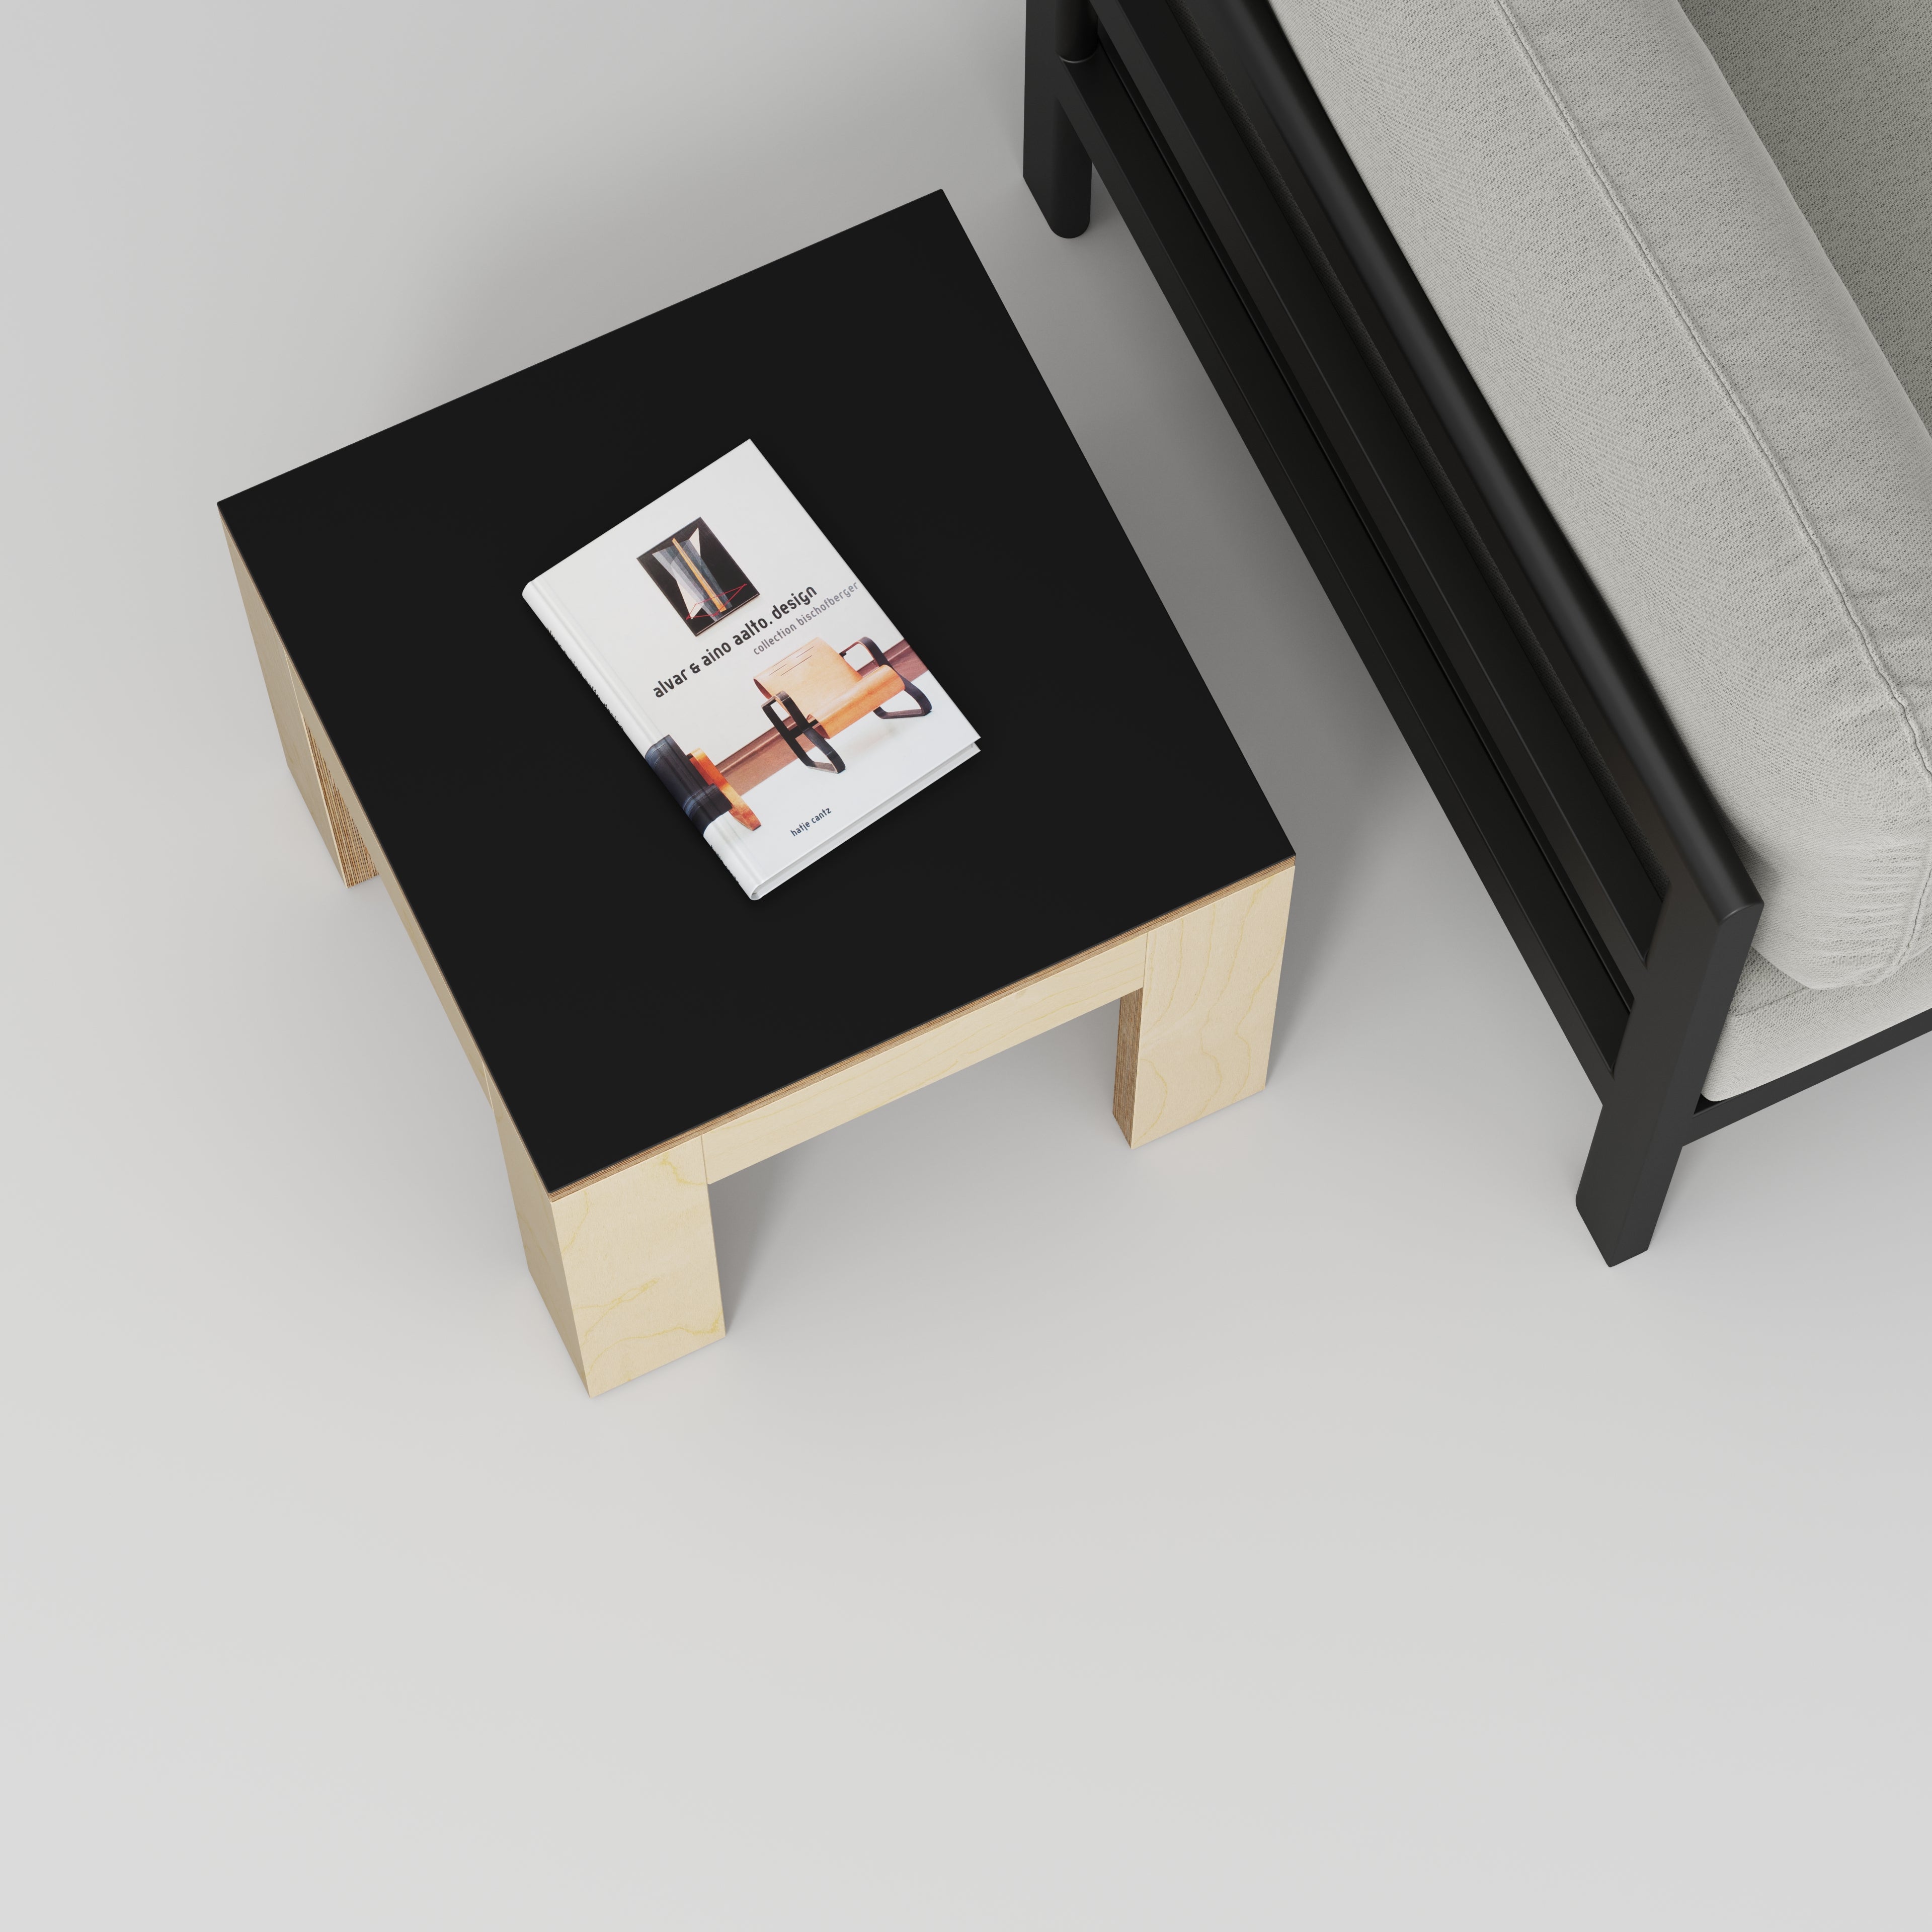 Side Table with Solid Frame - Formica Diamond Black - 500(w) x 500(d) x 450(h)